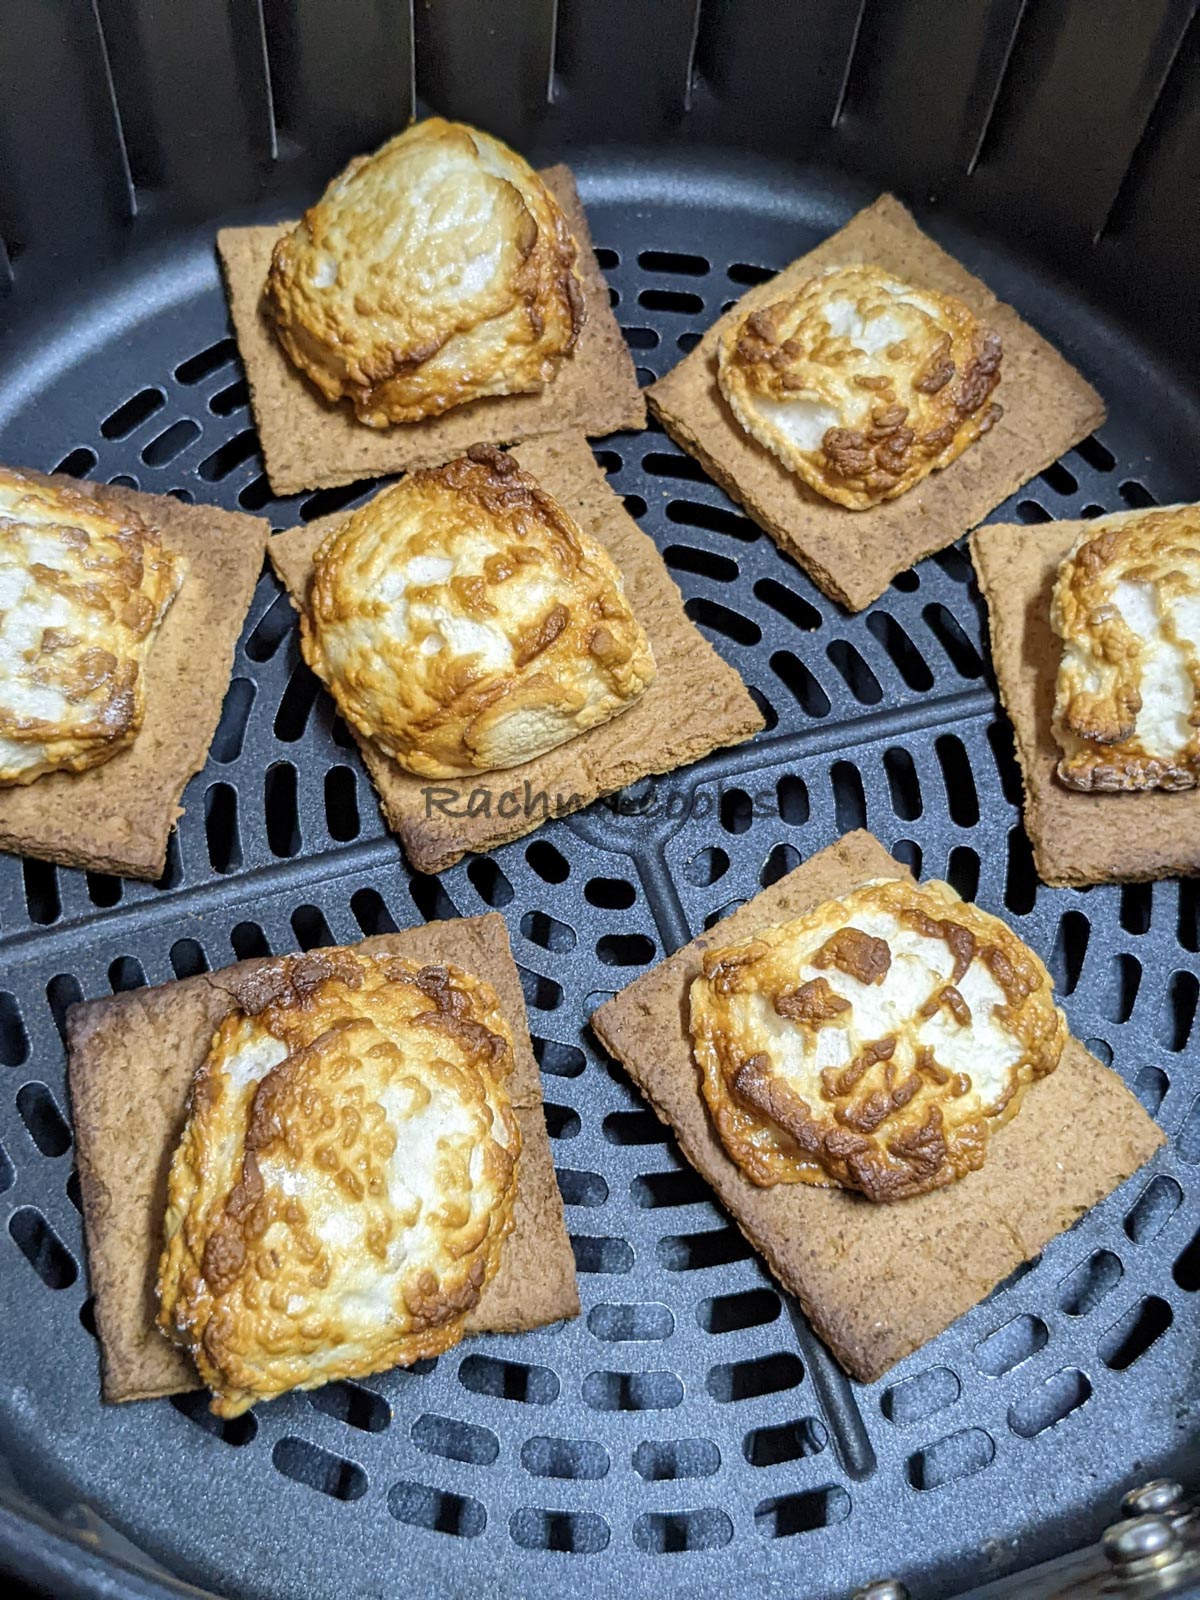 Toasted crackers along with roasted marshmallows on top after air frying in air fryer basket.